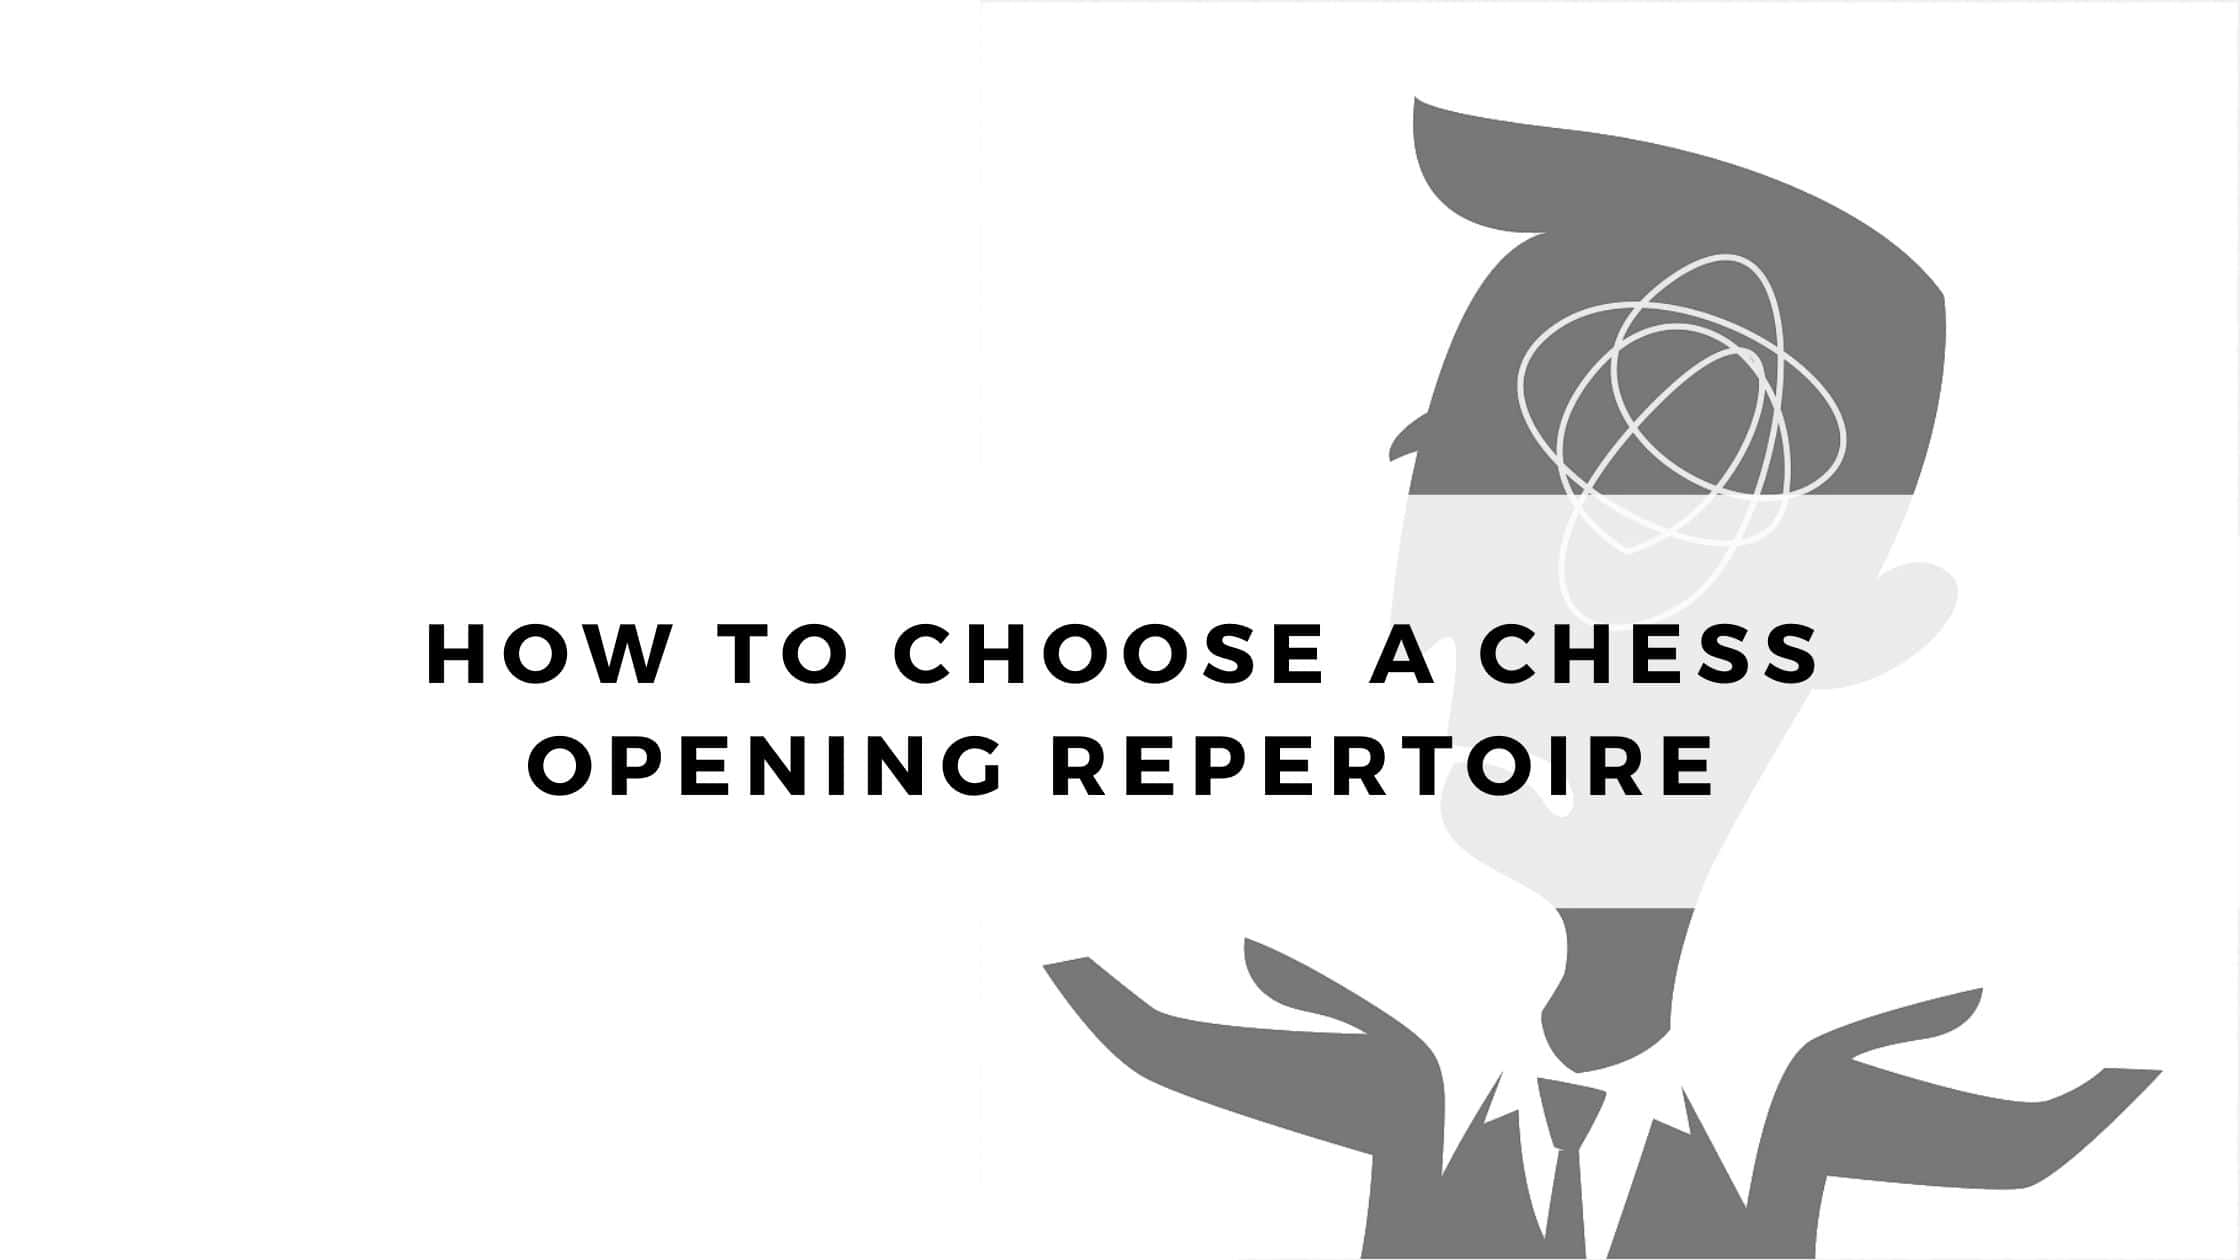 How To Choose a Chess Opening Repertoire